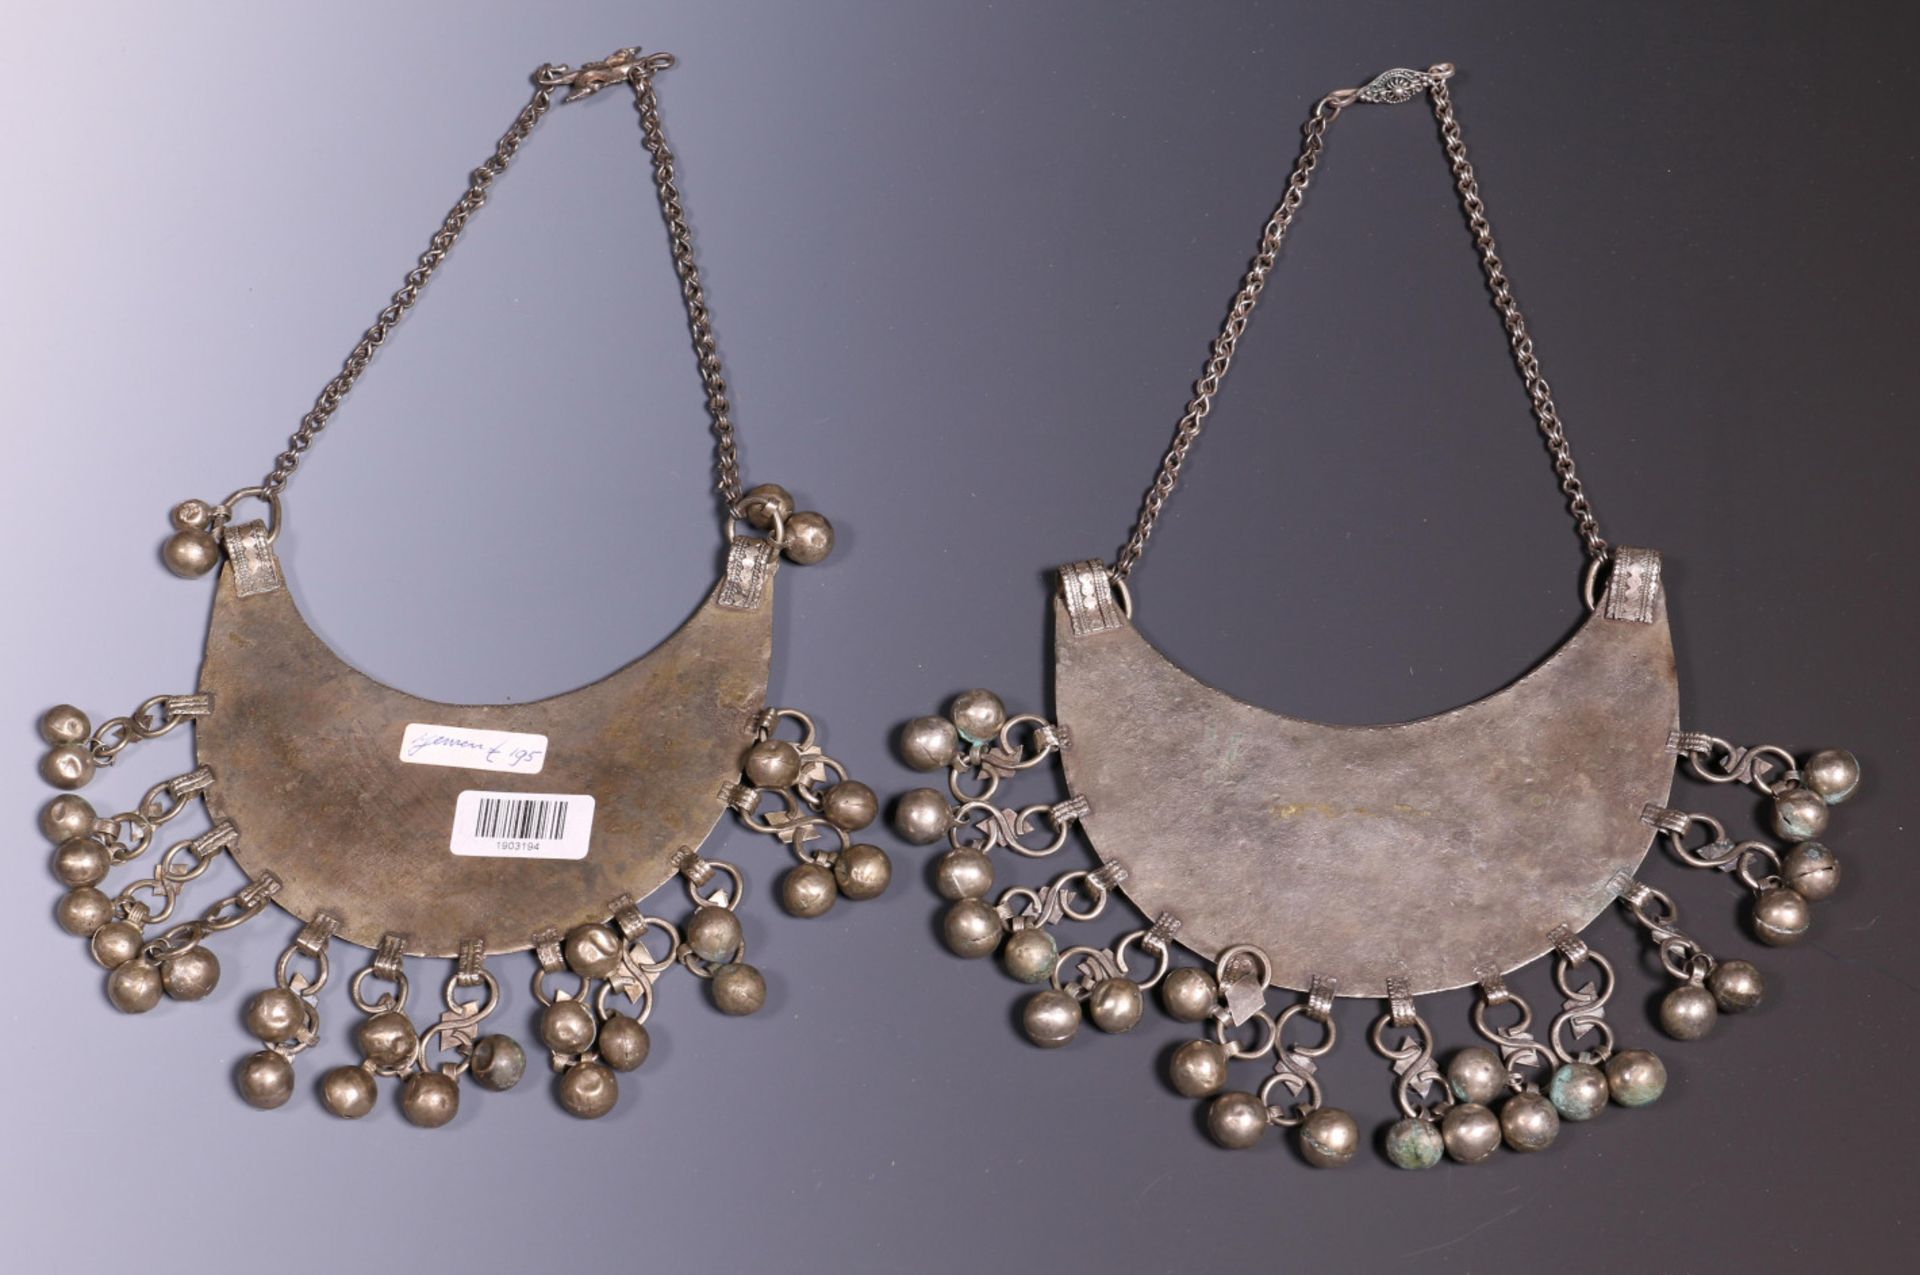 Jemen, pair of silver alloy necklaces, half-moon shaped with bells, on a chain - Bild 4 aus 5